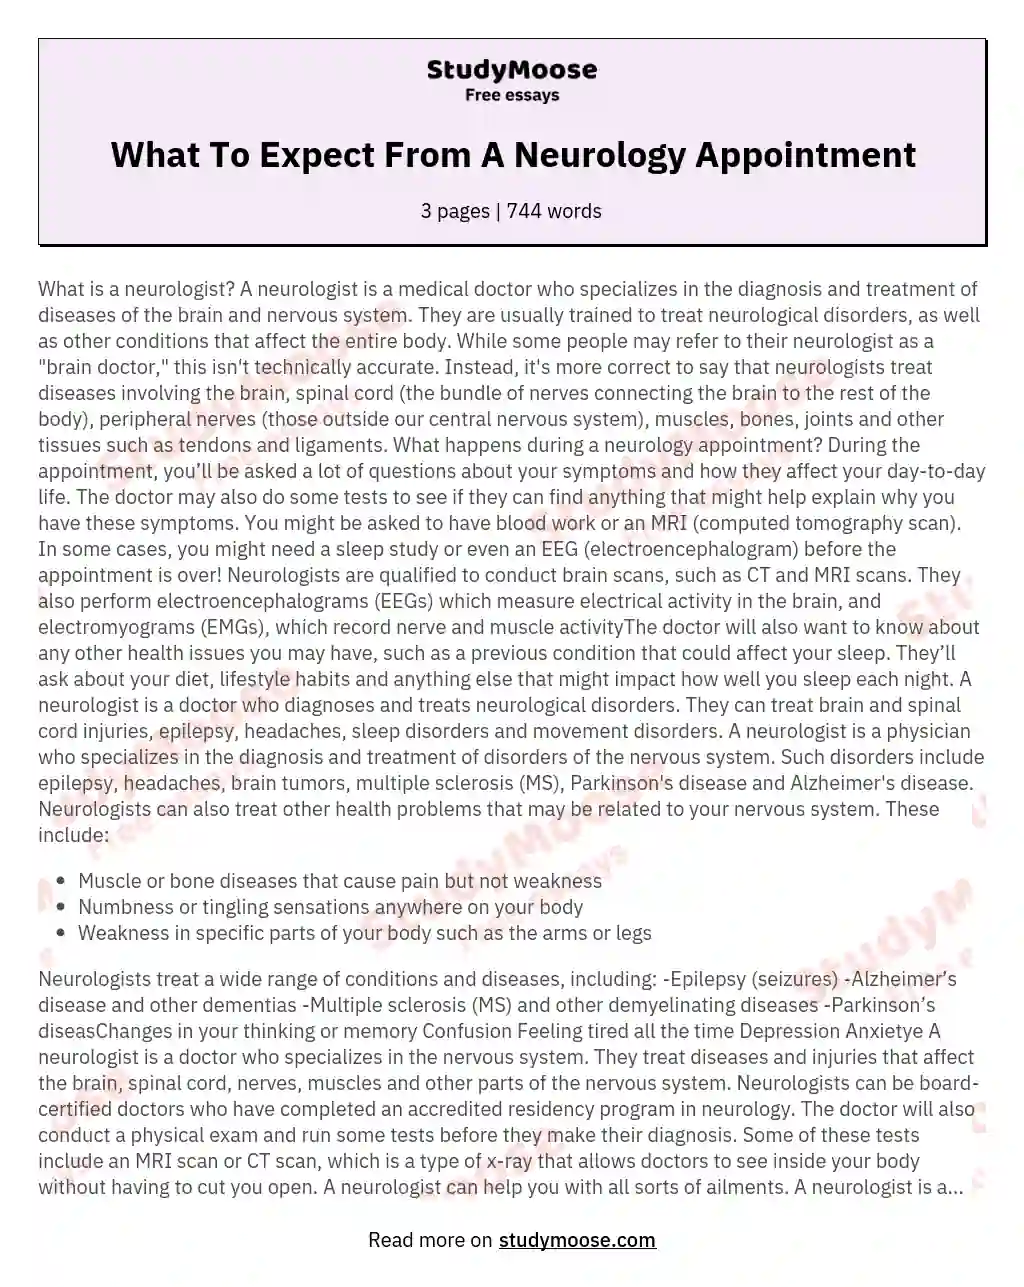 What To Expect From A Neurology Appointment essay